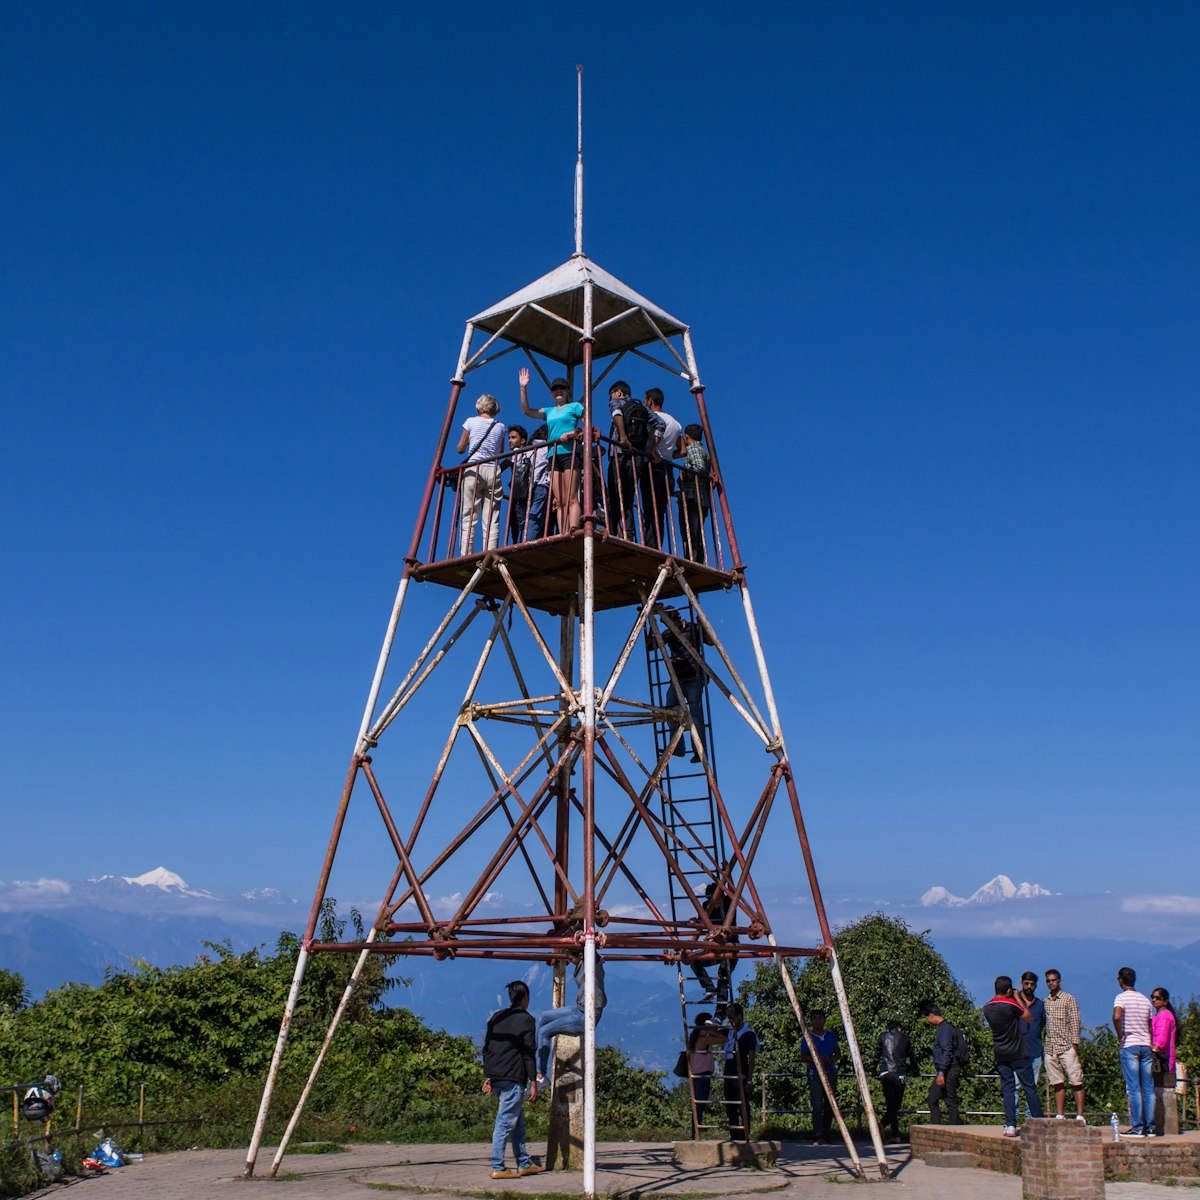 People admiring the panorama of the himalayas from Nagarkot View Tower.